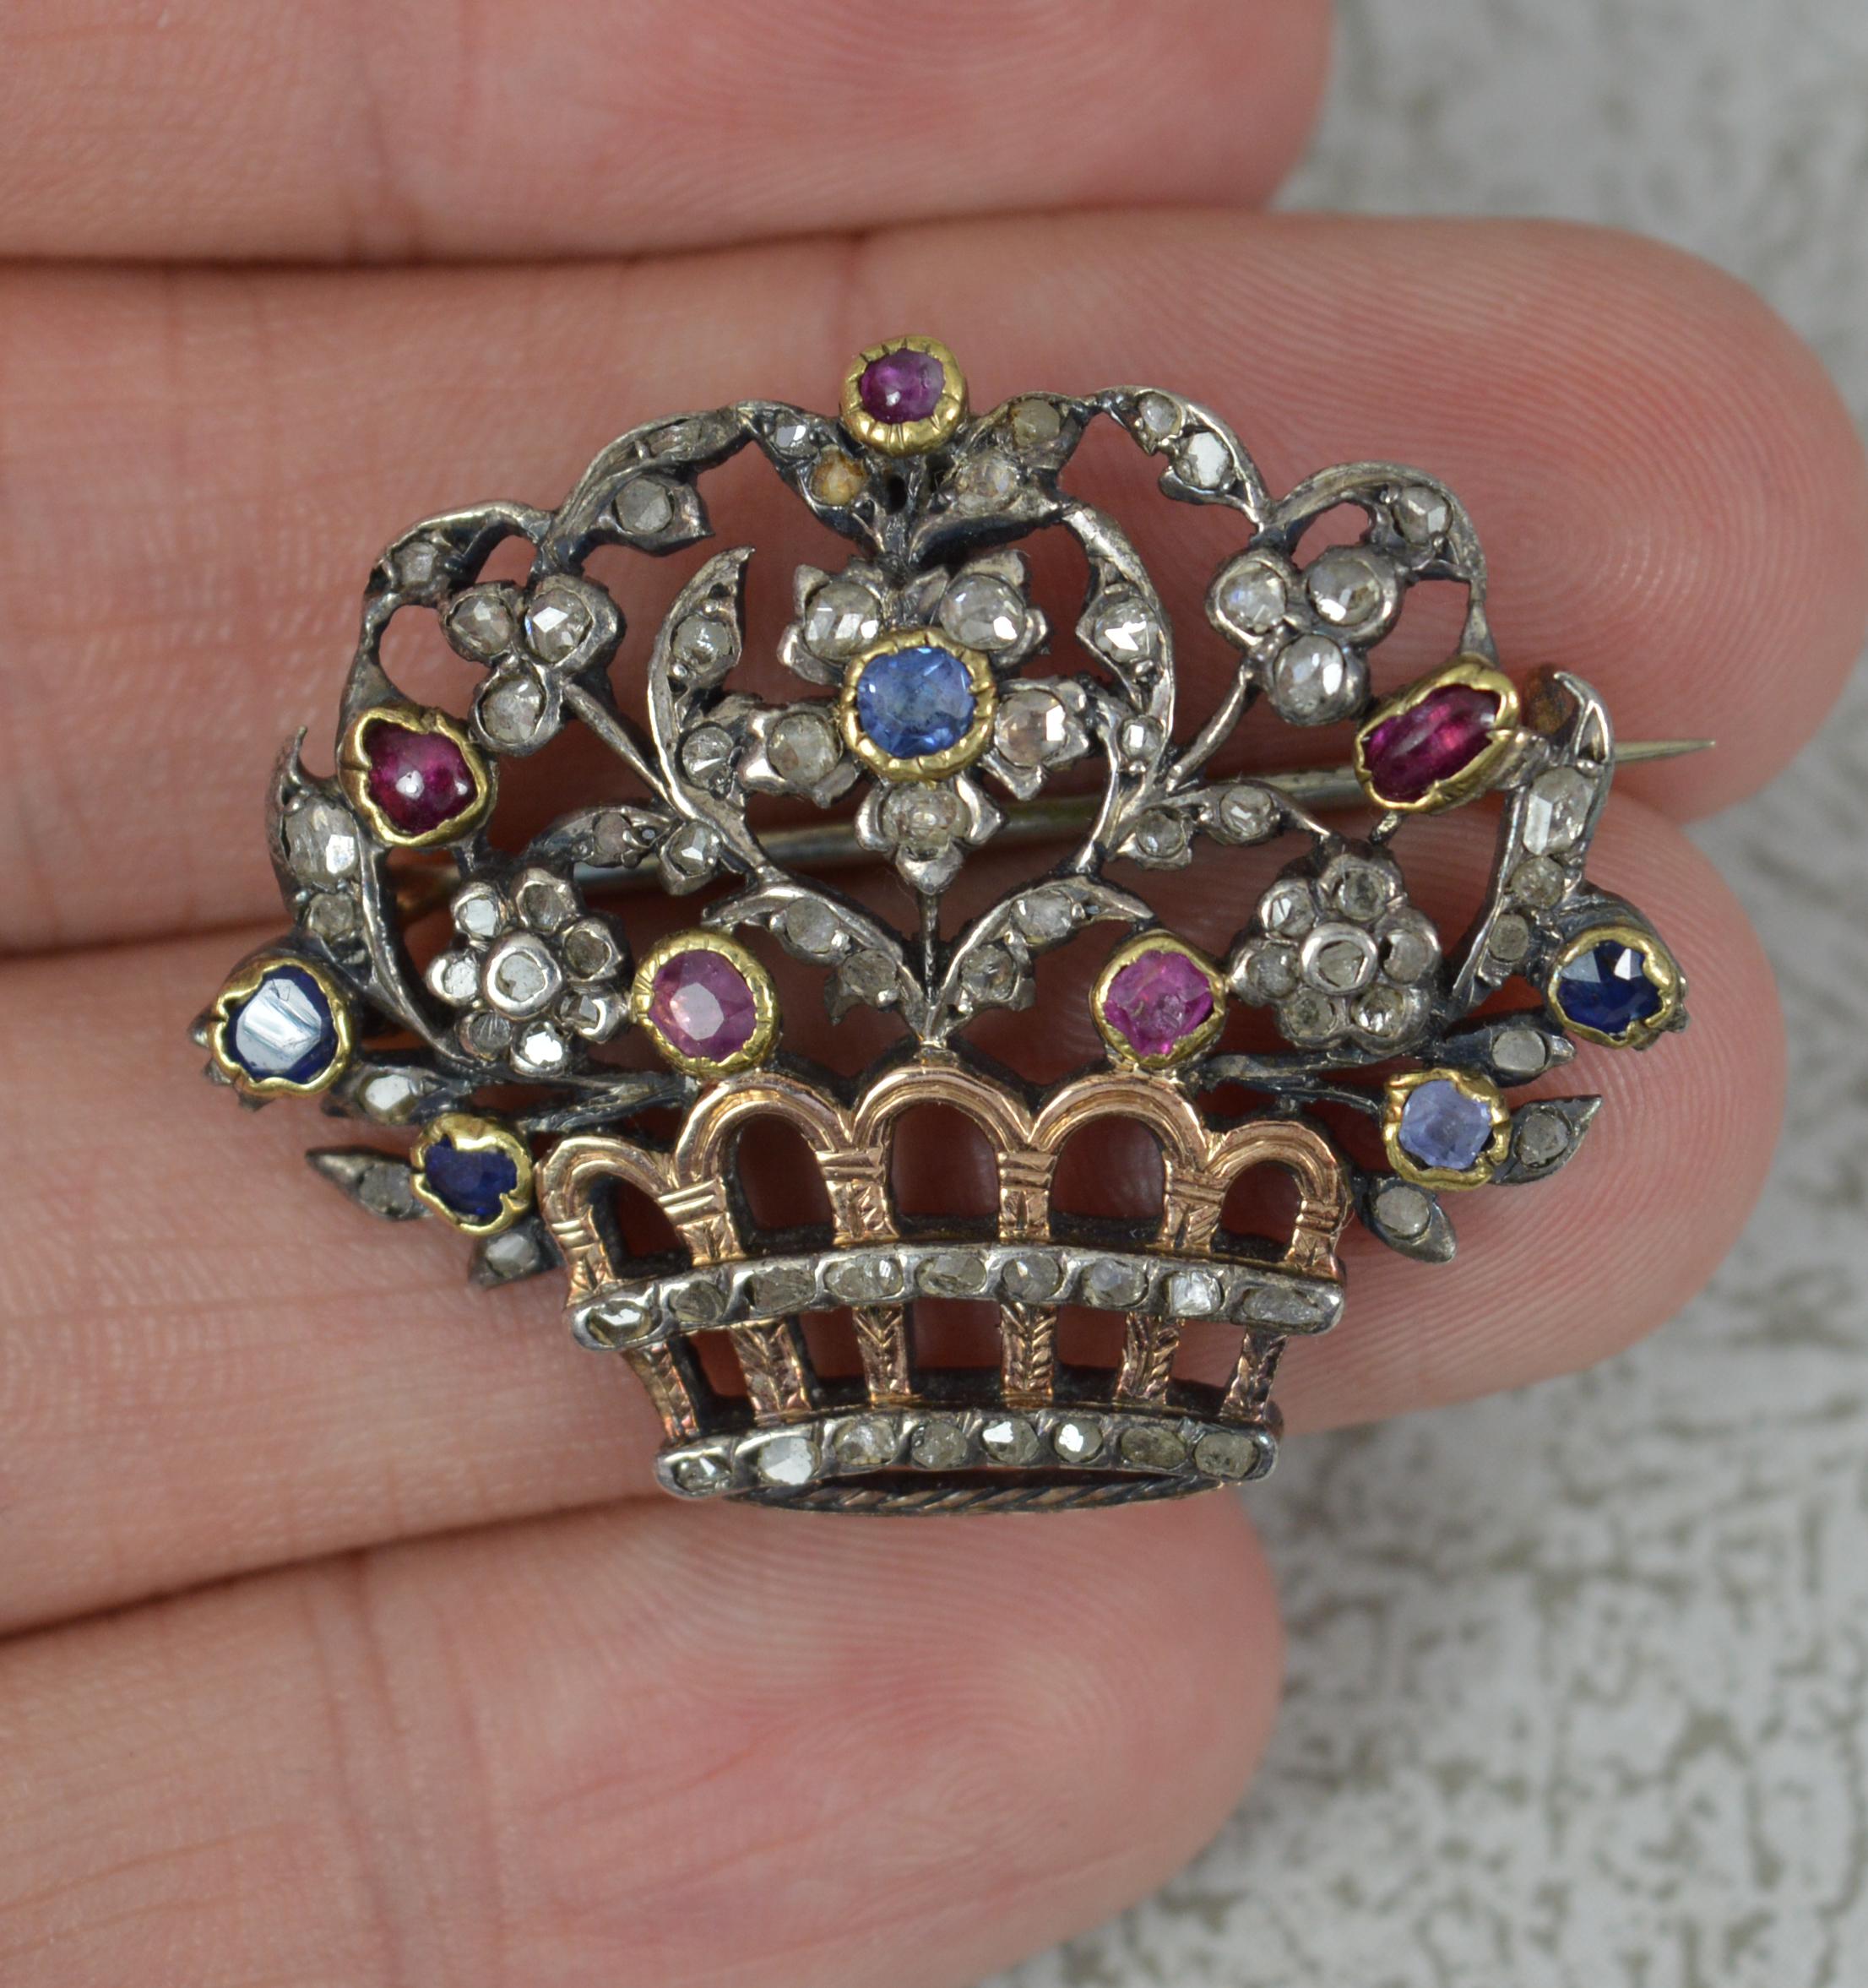 A superb early Victorian period giardinetti brooch.
Very finely made example in silver with rose gold settings, pin sections and basket.
Designed with many rose cut diamonds throughout the flower top and complete with natural rubies and